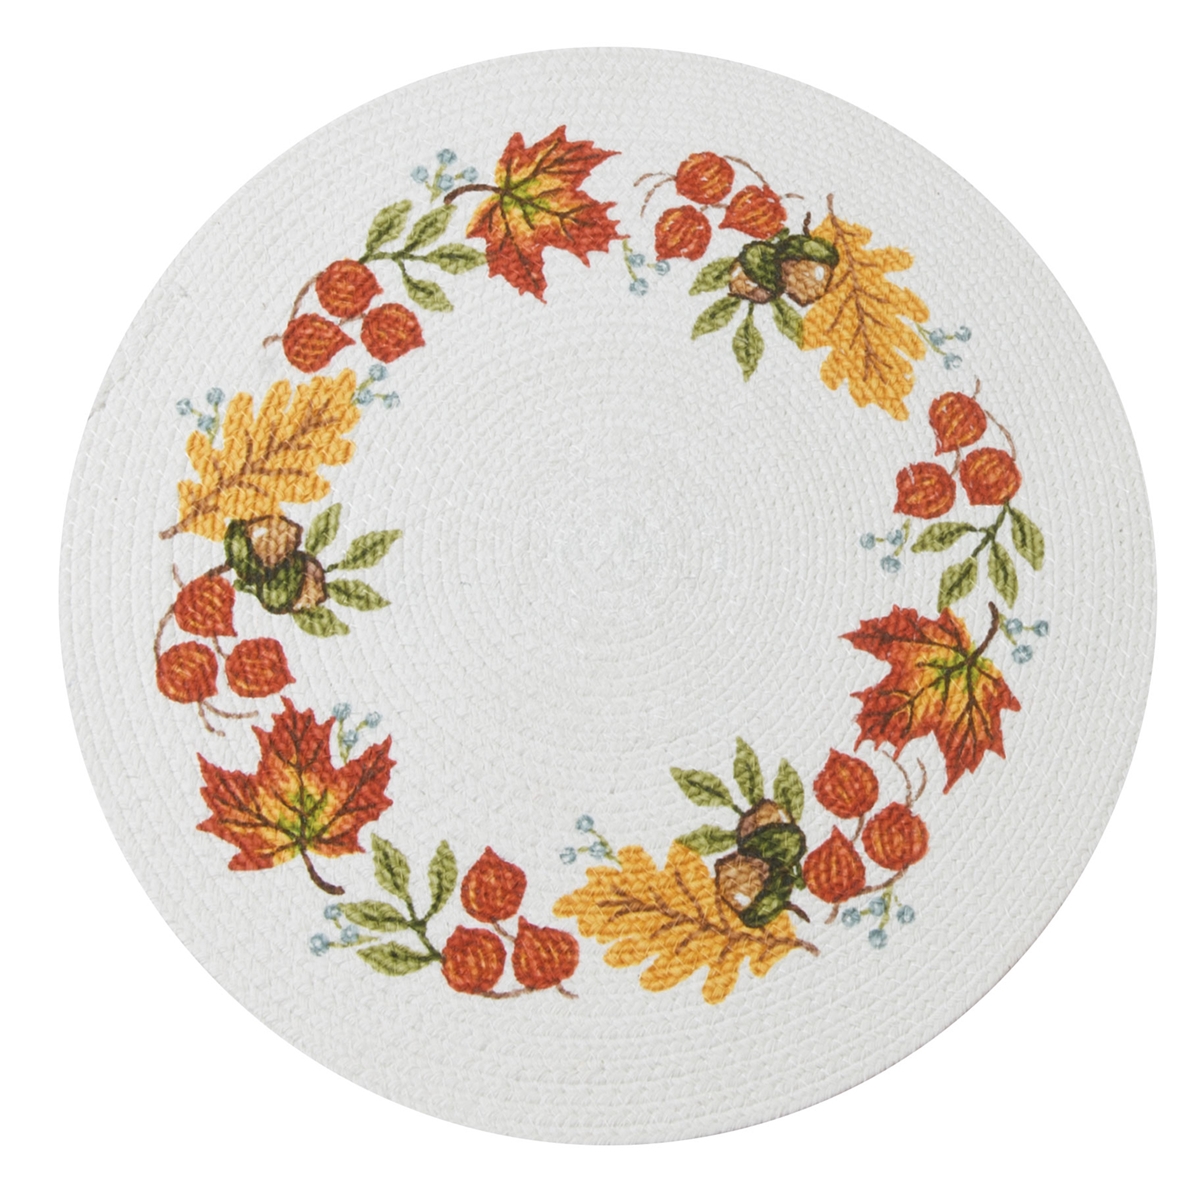 Harvest Braided Placemats